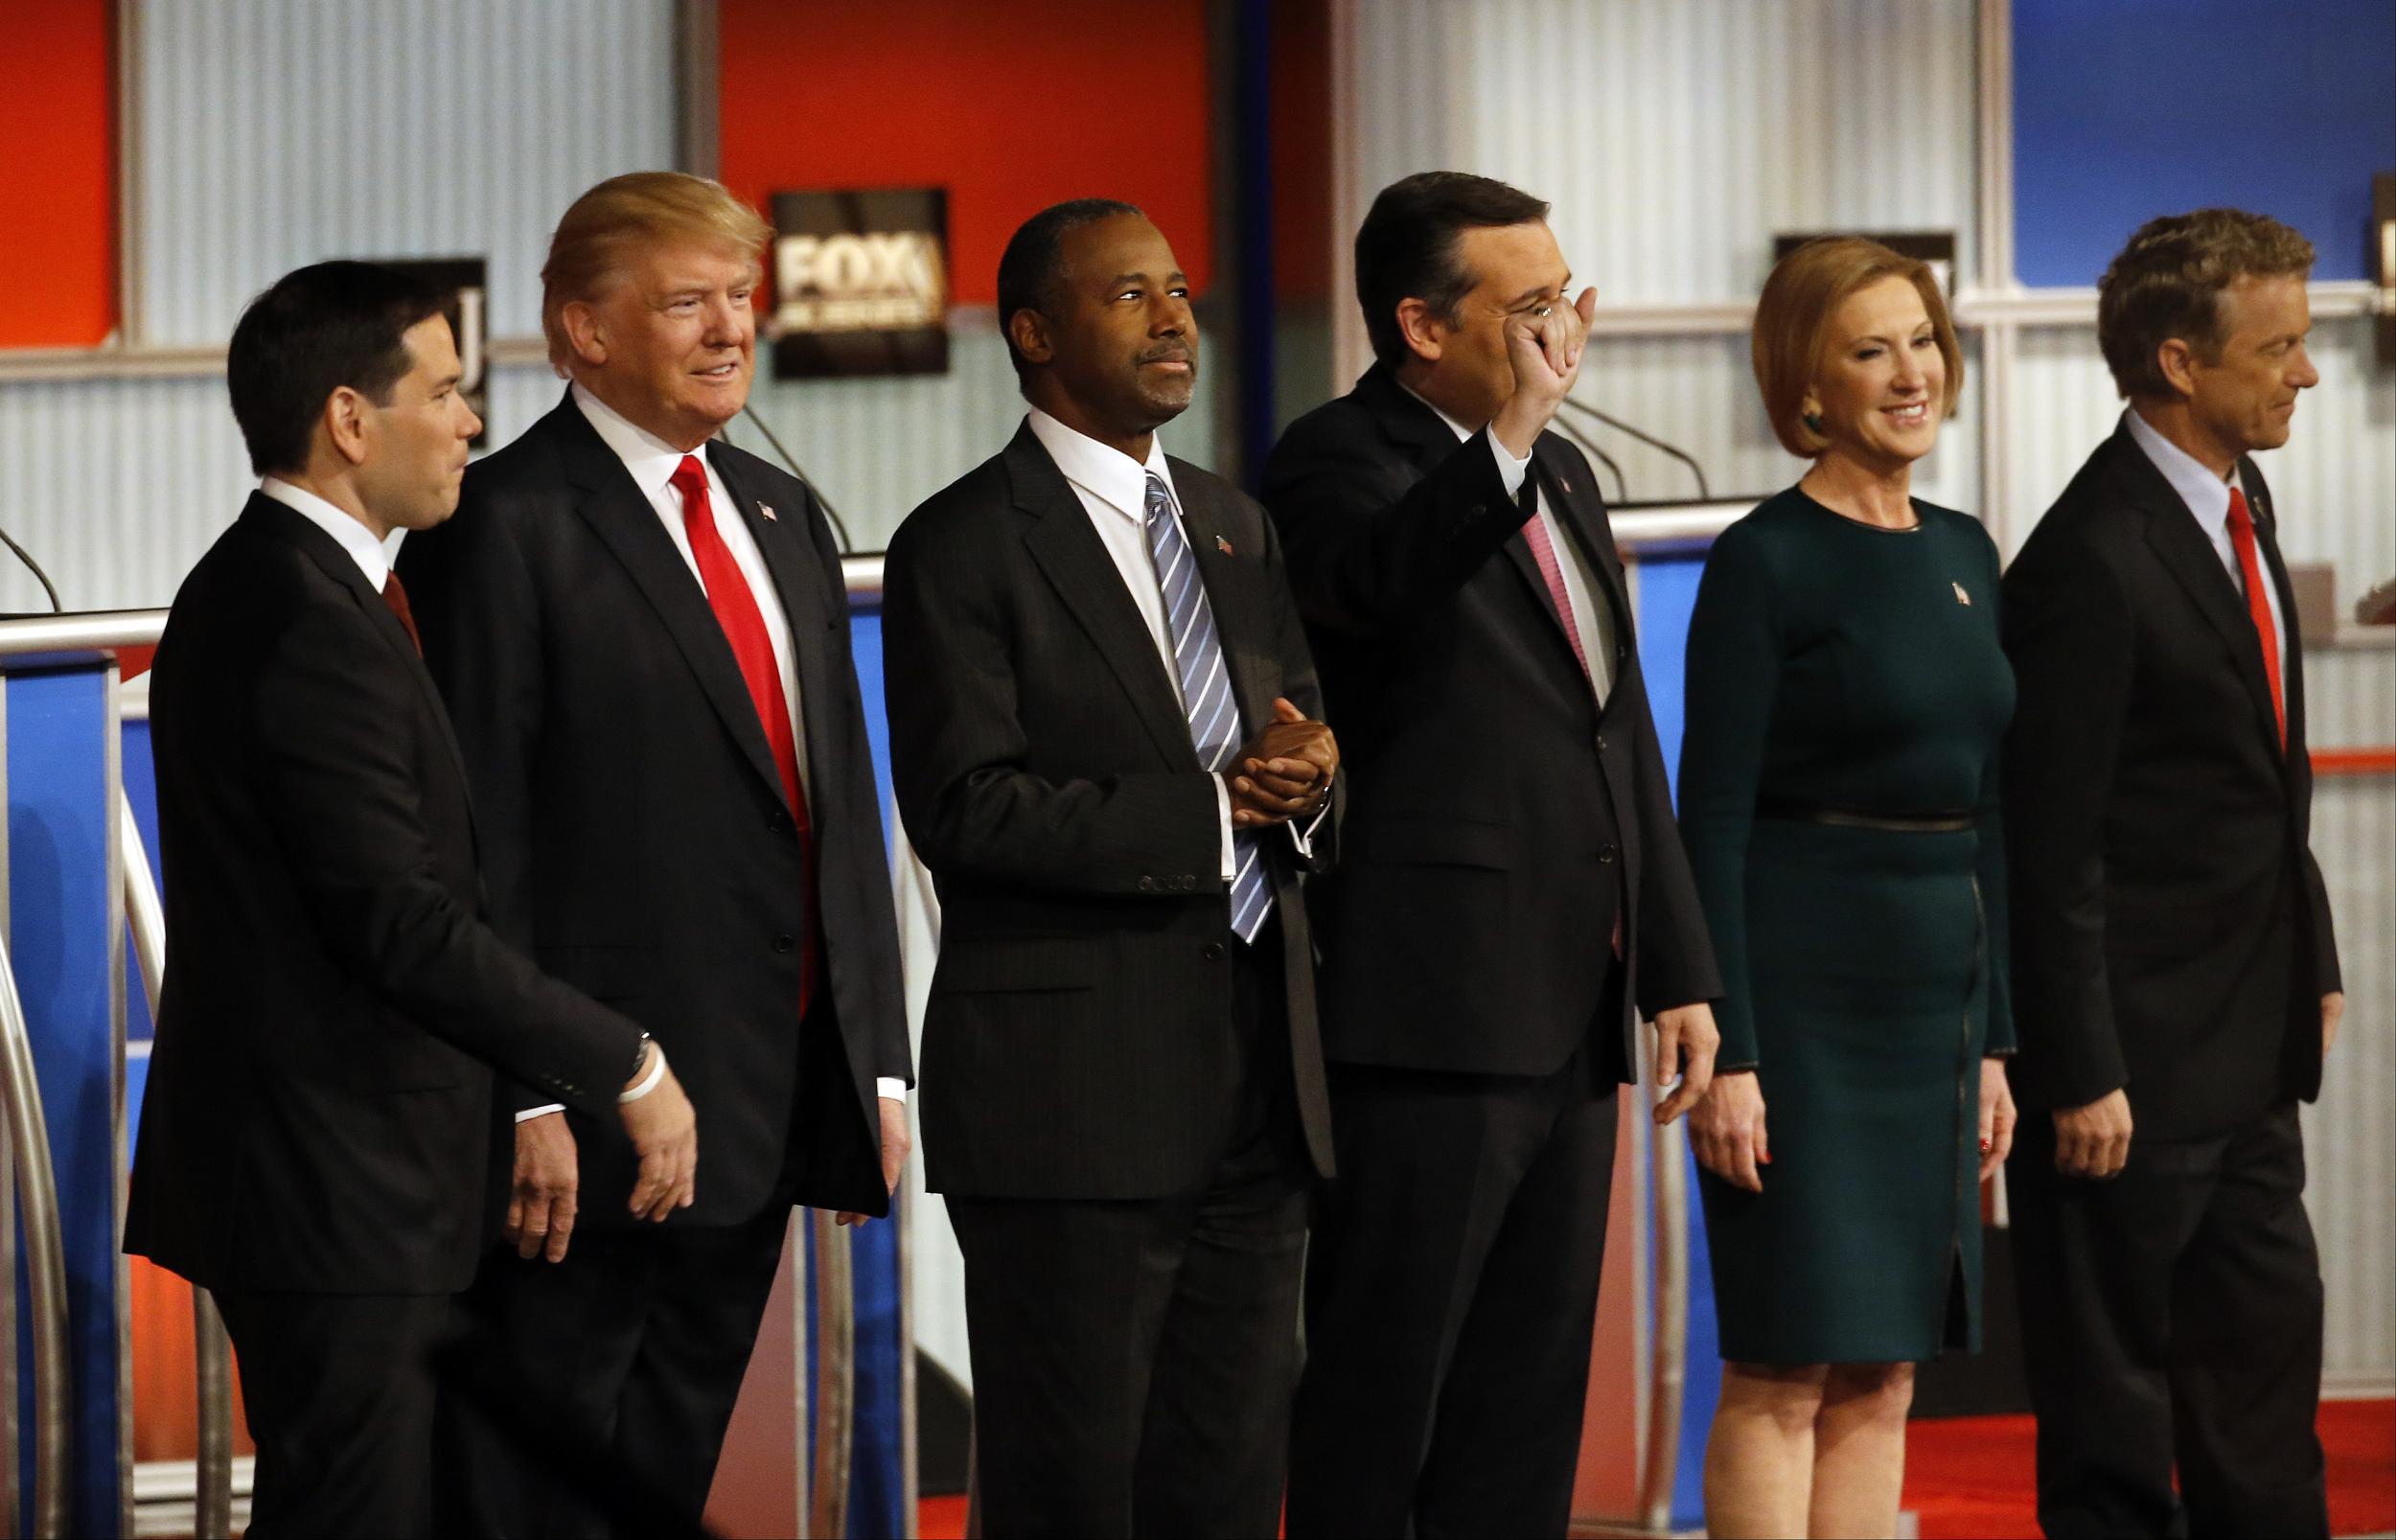 The leading candidates take the stage in Milwaukee. Morry Gash/AP